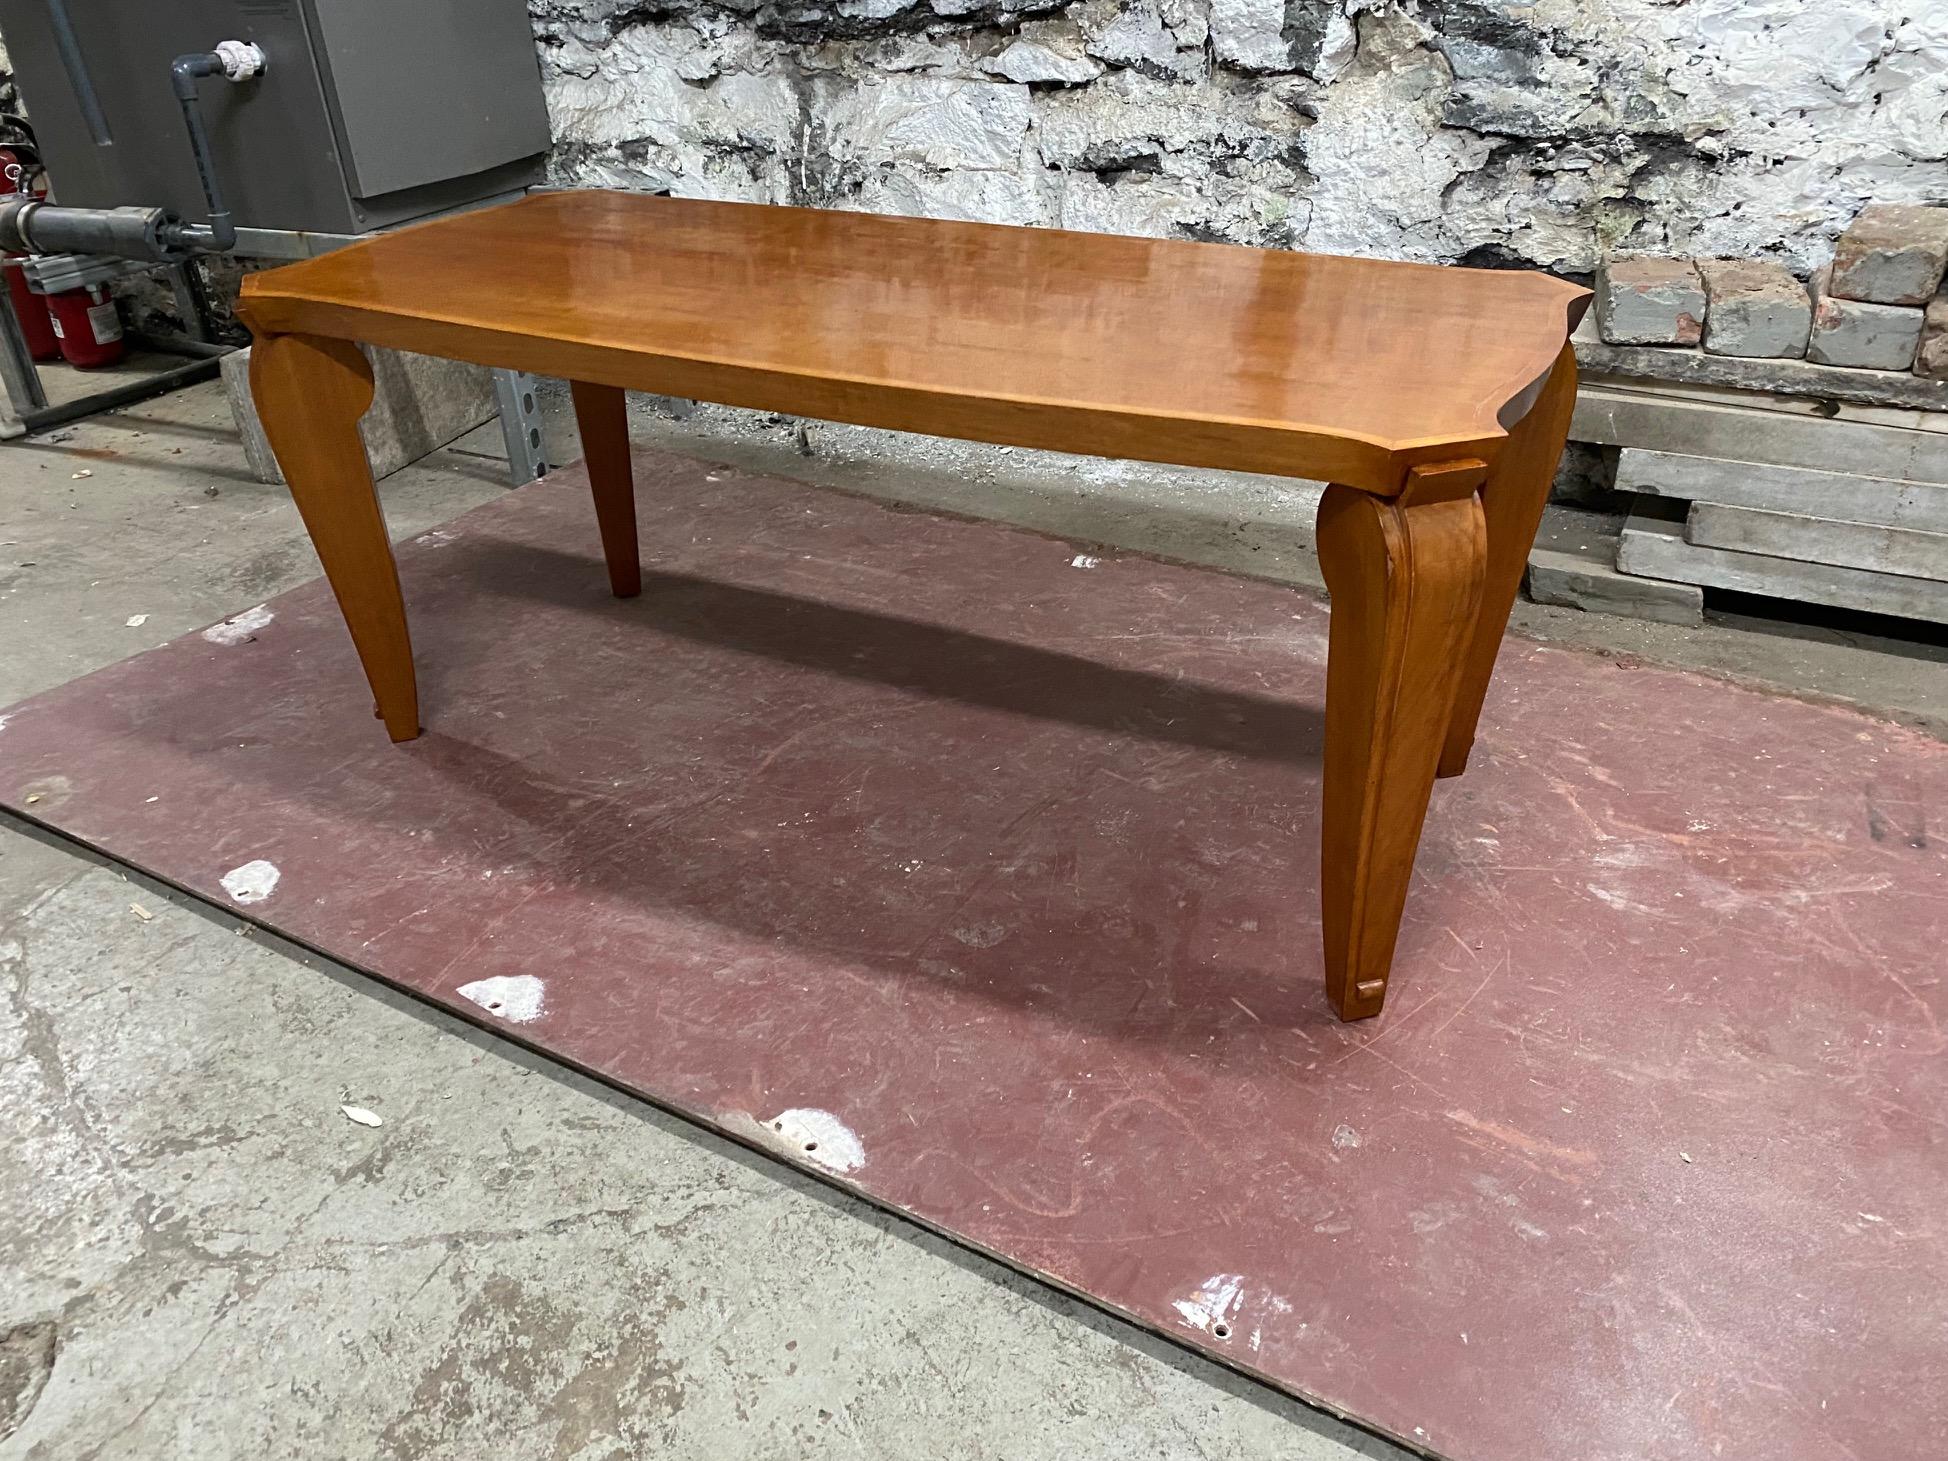 Art Deco mahogany coffee table by Andre Arbus.
Provenance: this buffet is part of a suite commissioned by Andre Arbus's personal physician .